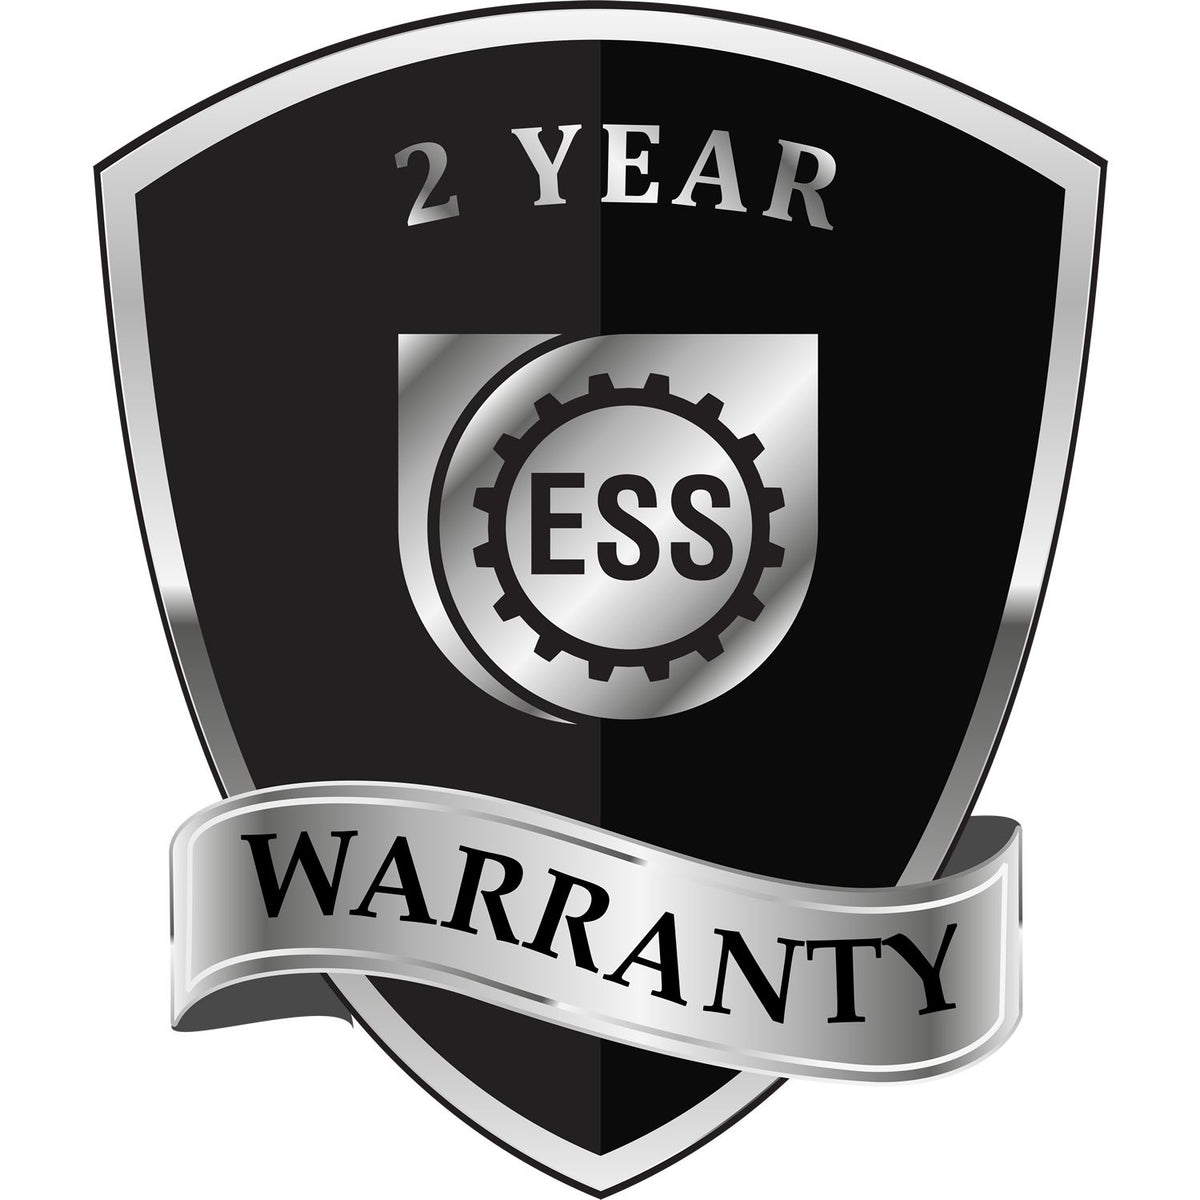 A badge or emblem showing a warranty icon for the Soft Missouri Professional Engineer Seal